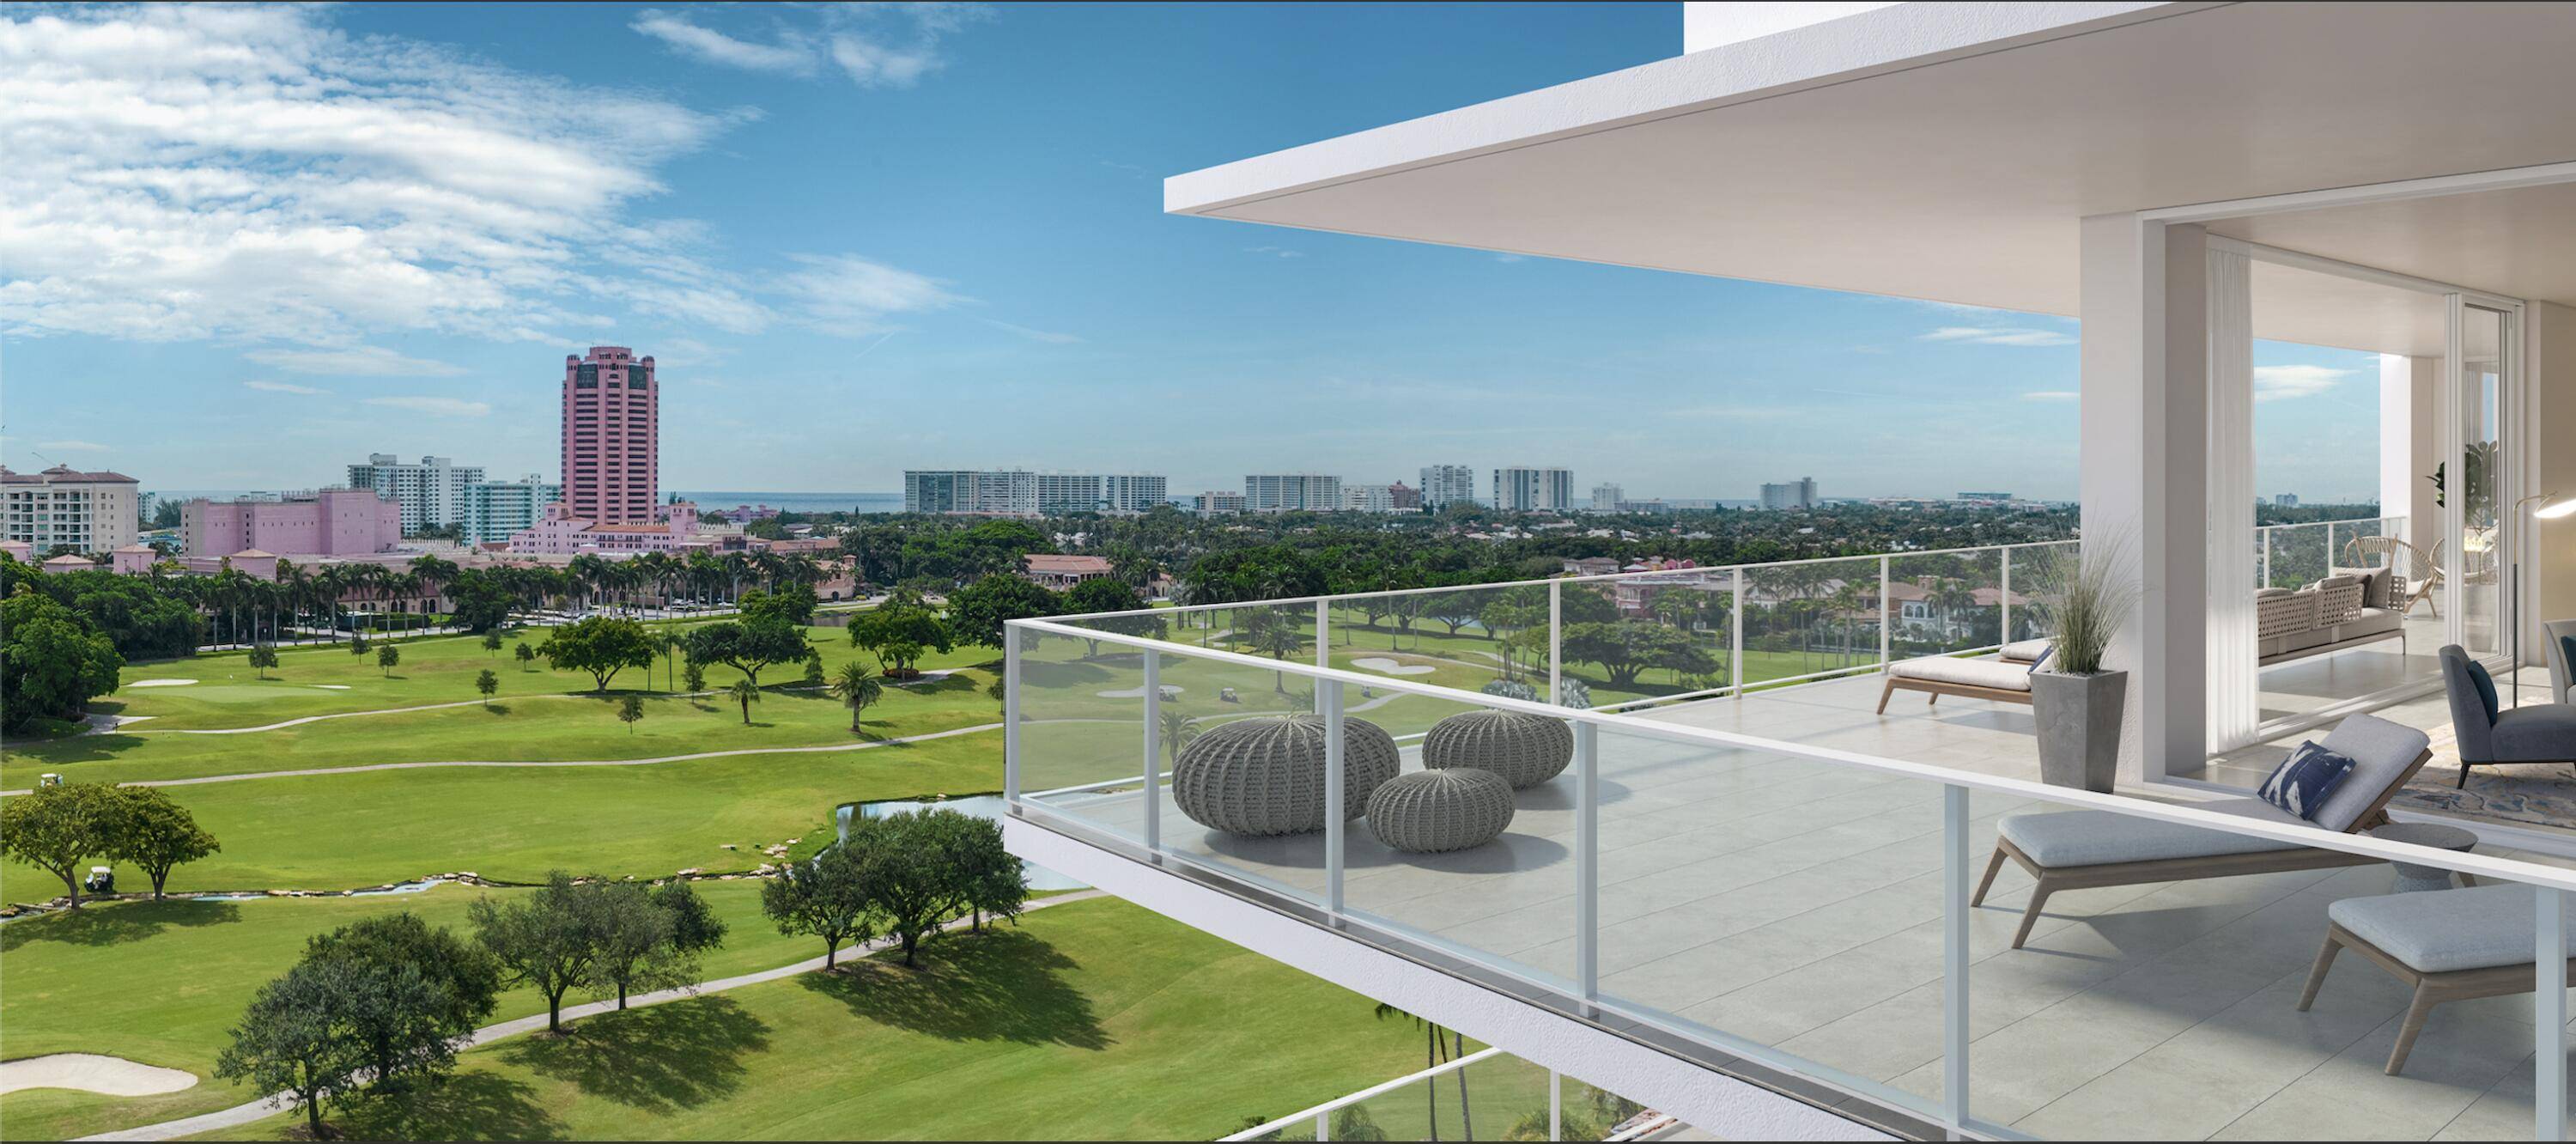 Your best downtown Boca Raton luxury pre construction opportunity has arrived Welcome to The Alina 220 Collection in Phase II of ALINA.